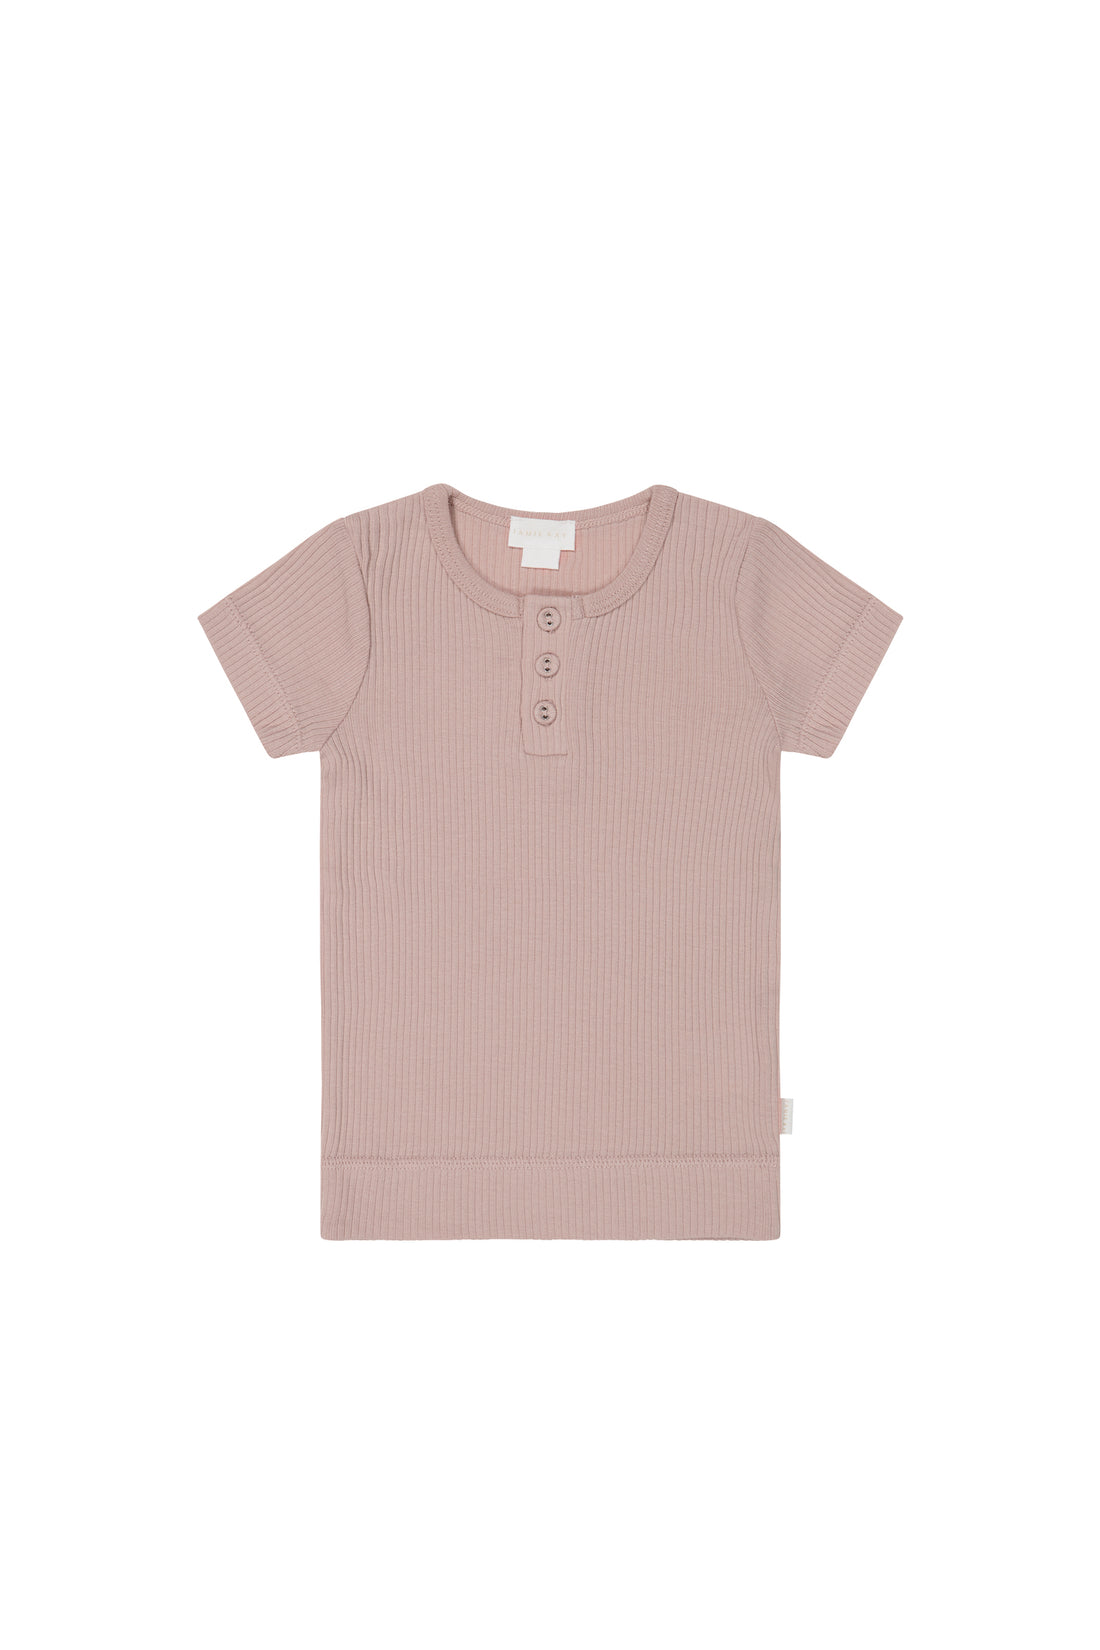 Organic Cotton Modal Henley Tee - Shell Pink Childrens Top from Jamie Kay NZ